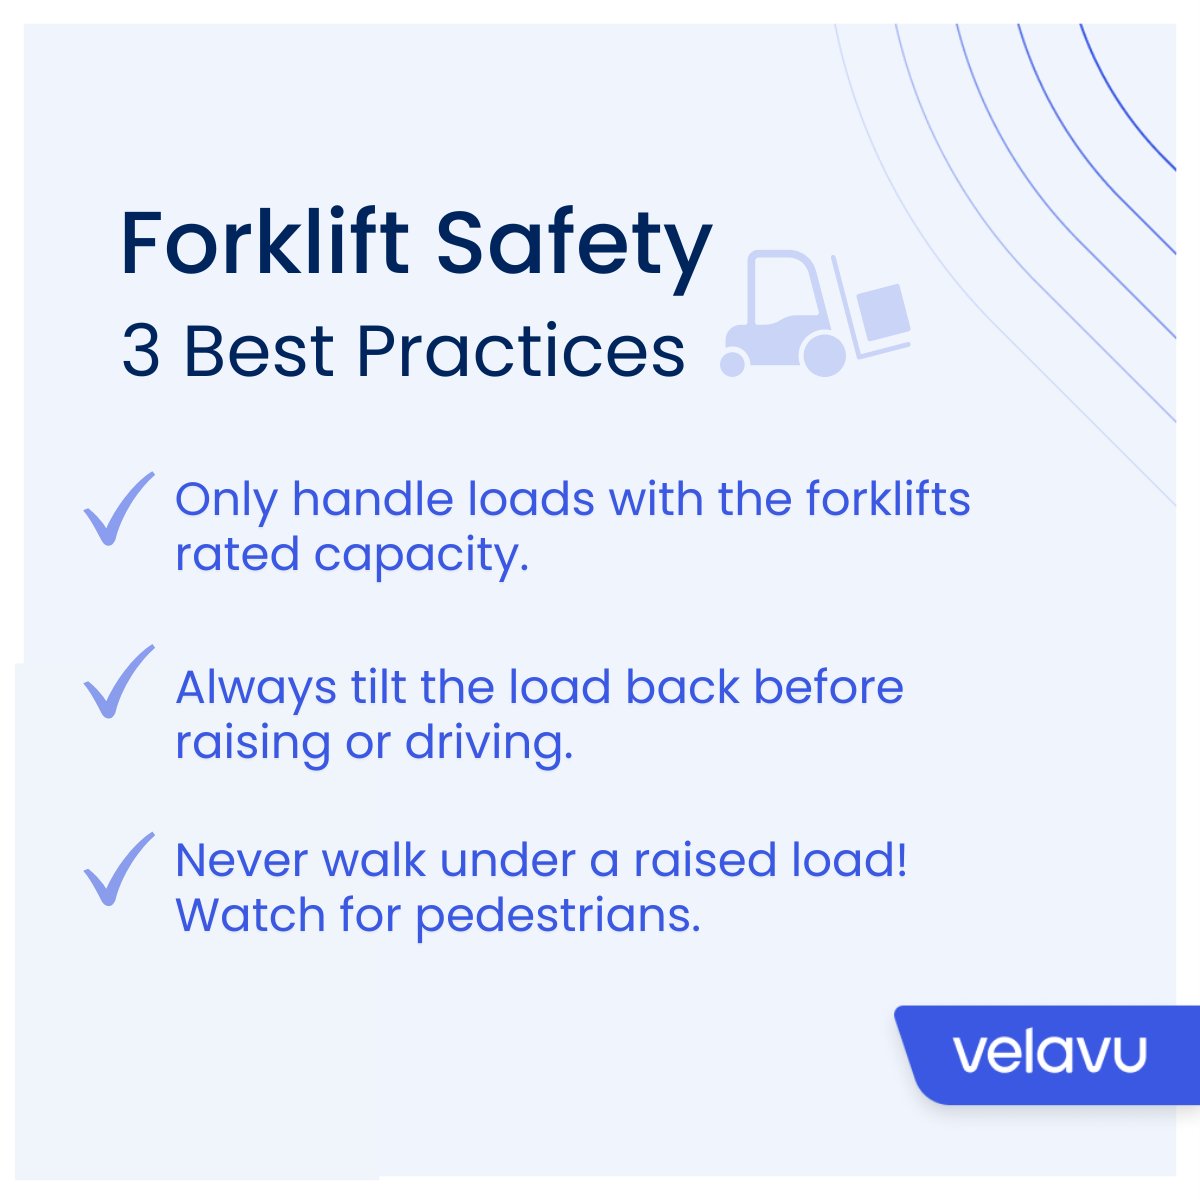 With thousands of forklift injuries happening every year, safety awareness is essential. Keep safe with these 3 best practices! 
#wednesdaywisdom #warehousemanagement #operationsmanagement #warehousing #distribution #safetymeasures #forkliftoperator